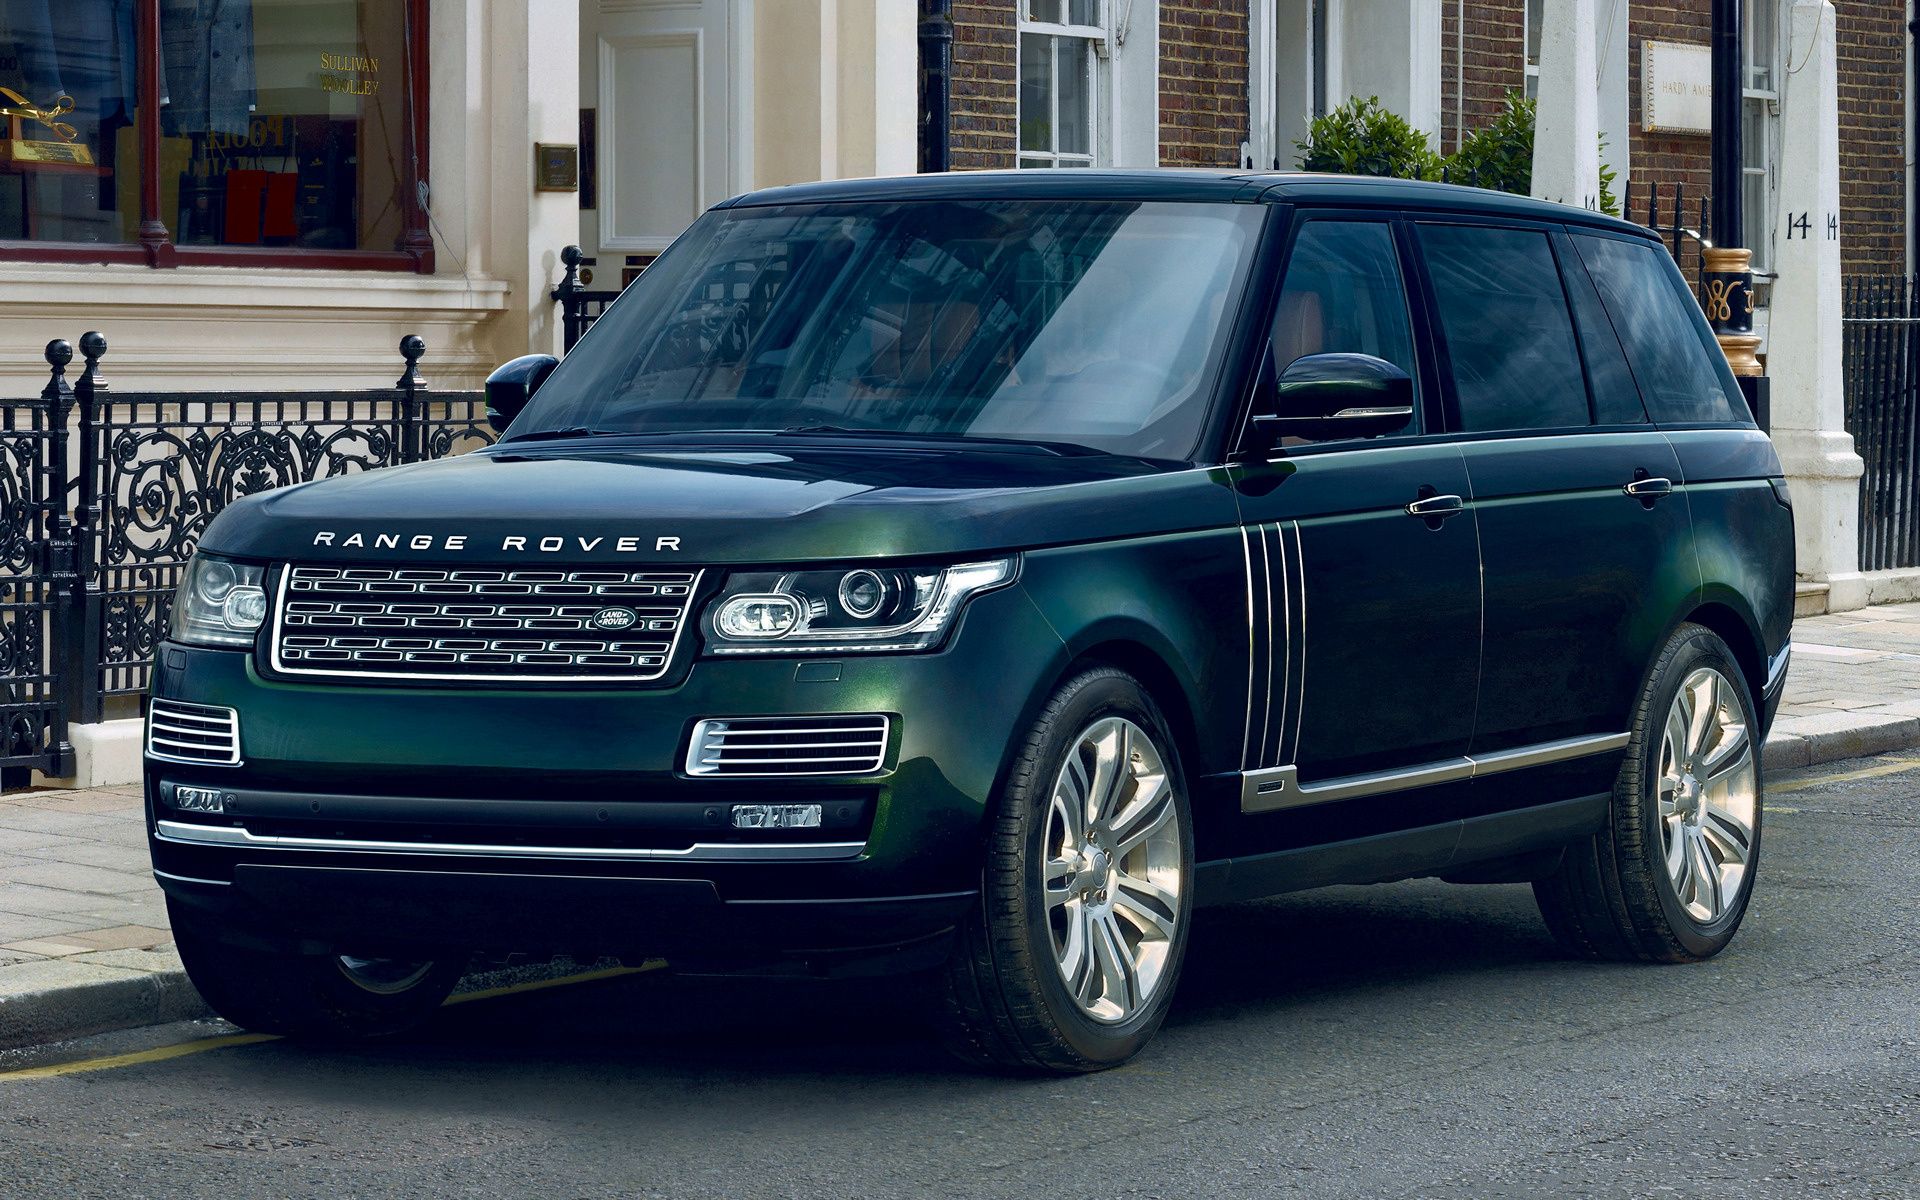 Range Rover Autobiography Black Holland & Holland and HD Image